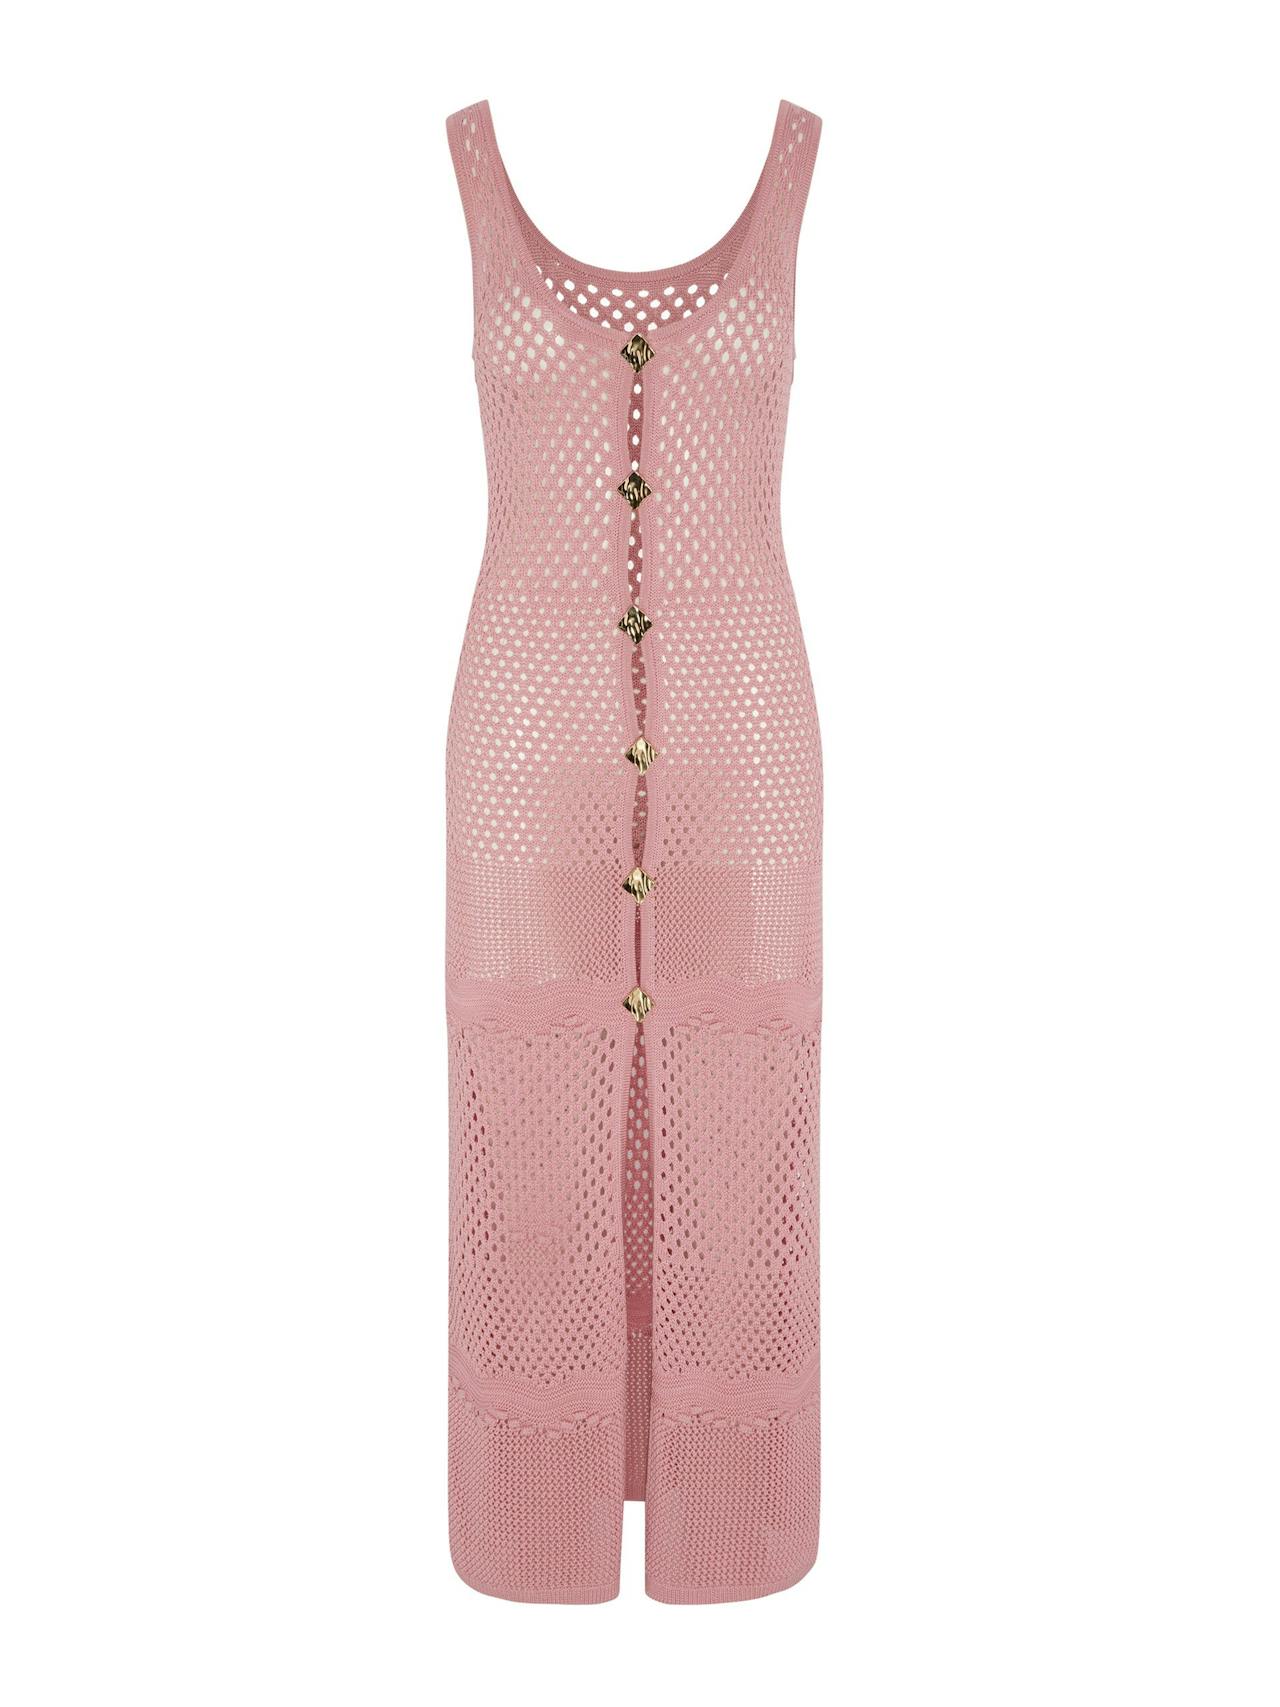 Mara knitted dress in chateau rose harrods exclusive